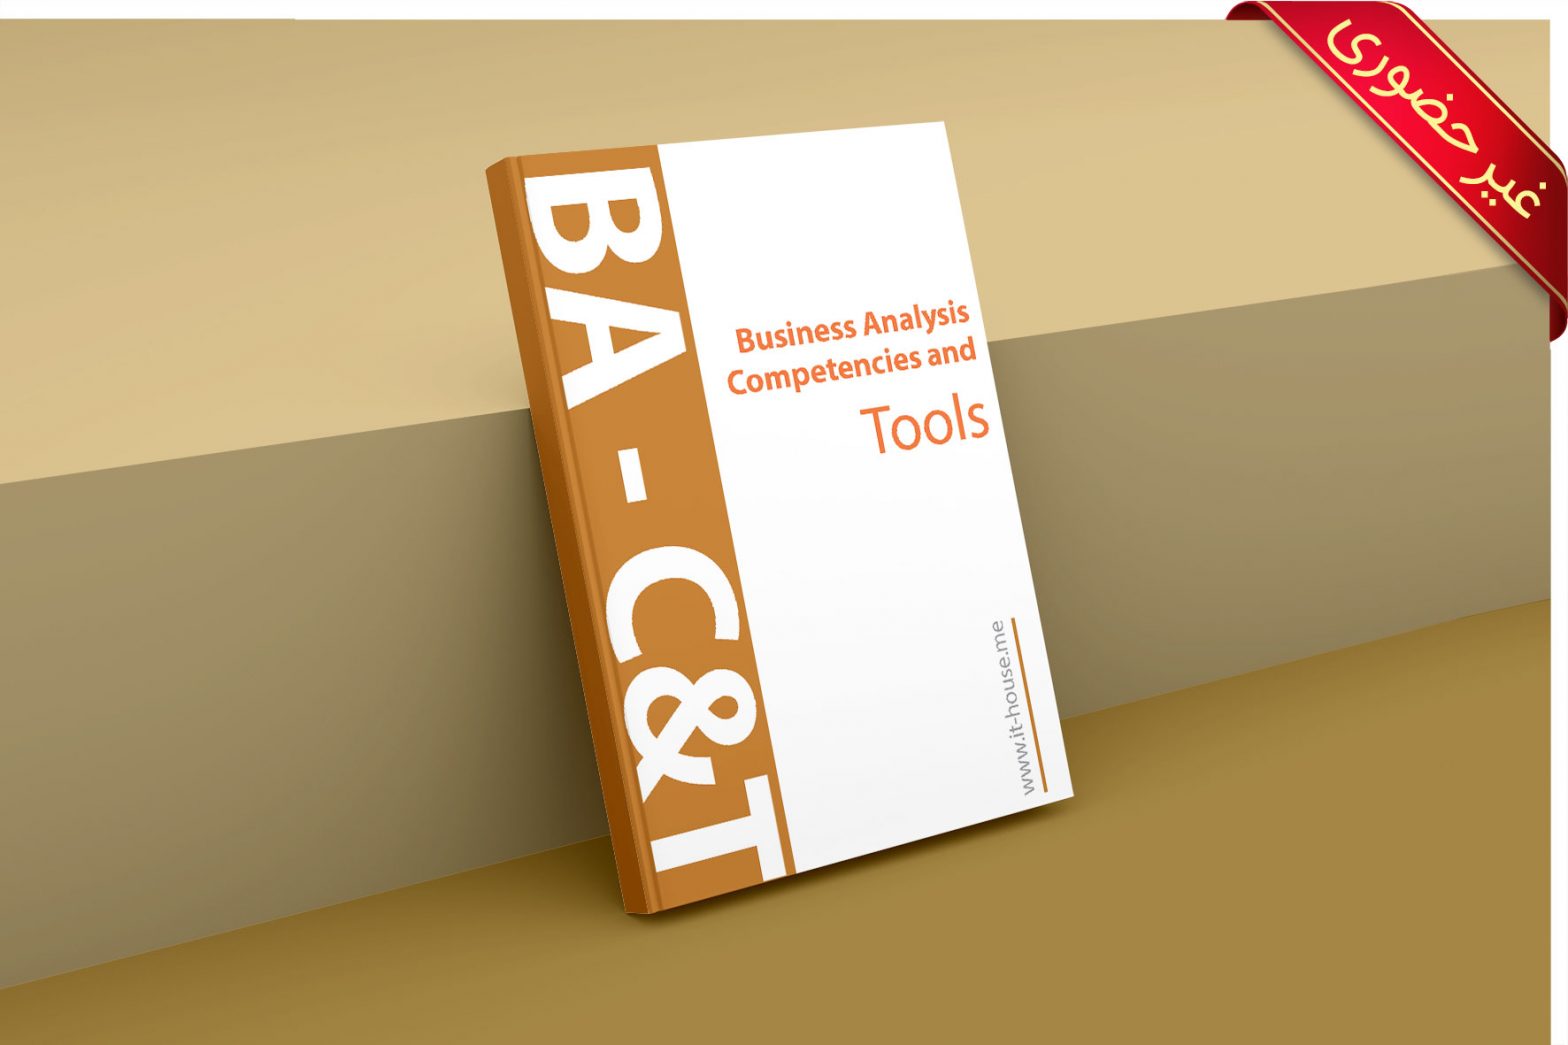 Business Analysis (BABOK) Competency & Tools